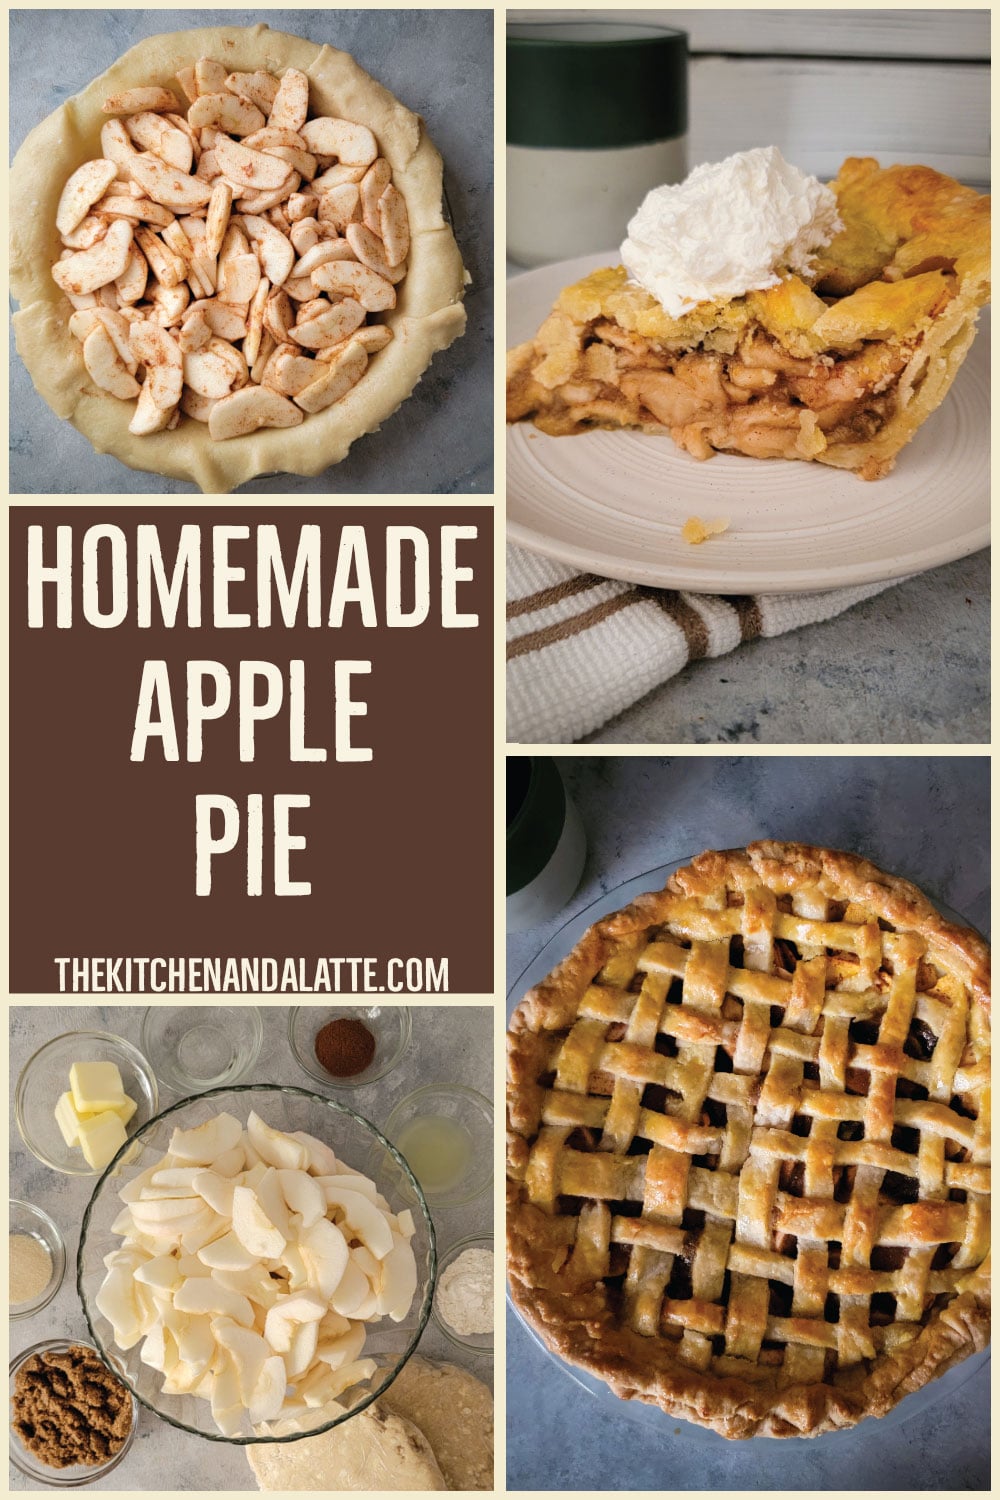 Homemade apple pie Pinterest graphic - 4 pictures. 1 is finished pie cooling in pie dish, 1 is the ingredients prepped, 1 is the apples placed inside pie crust before adding top and last 1 is a slice of pie with whipped cream on top.